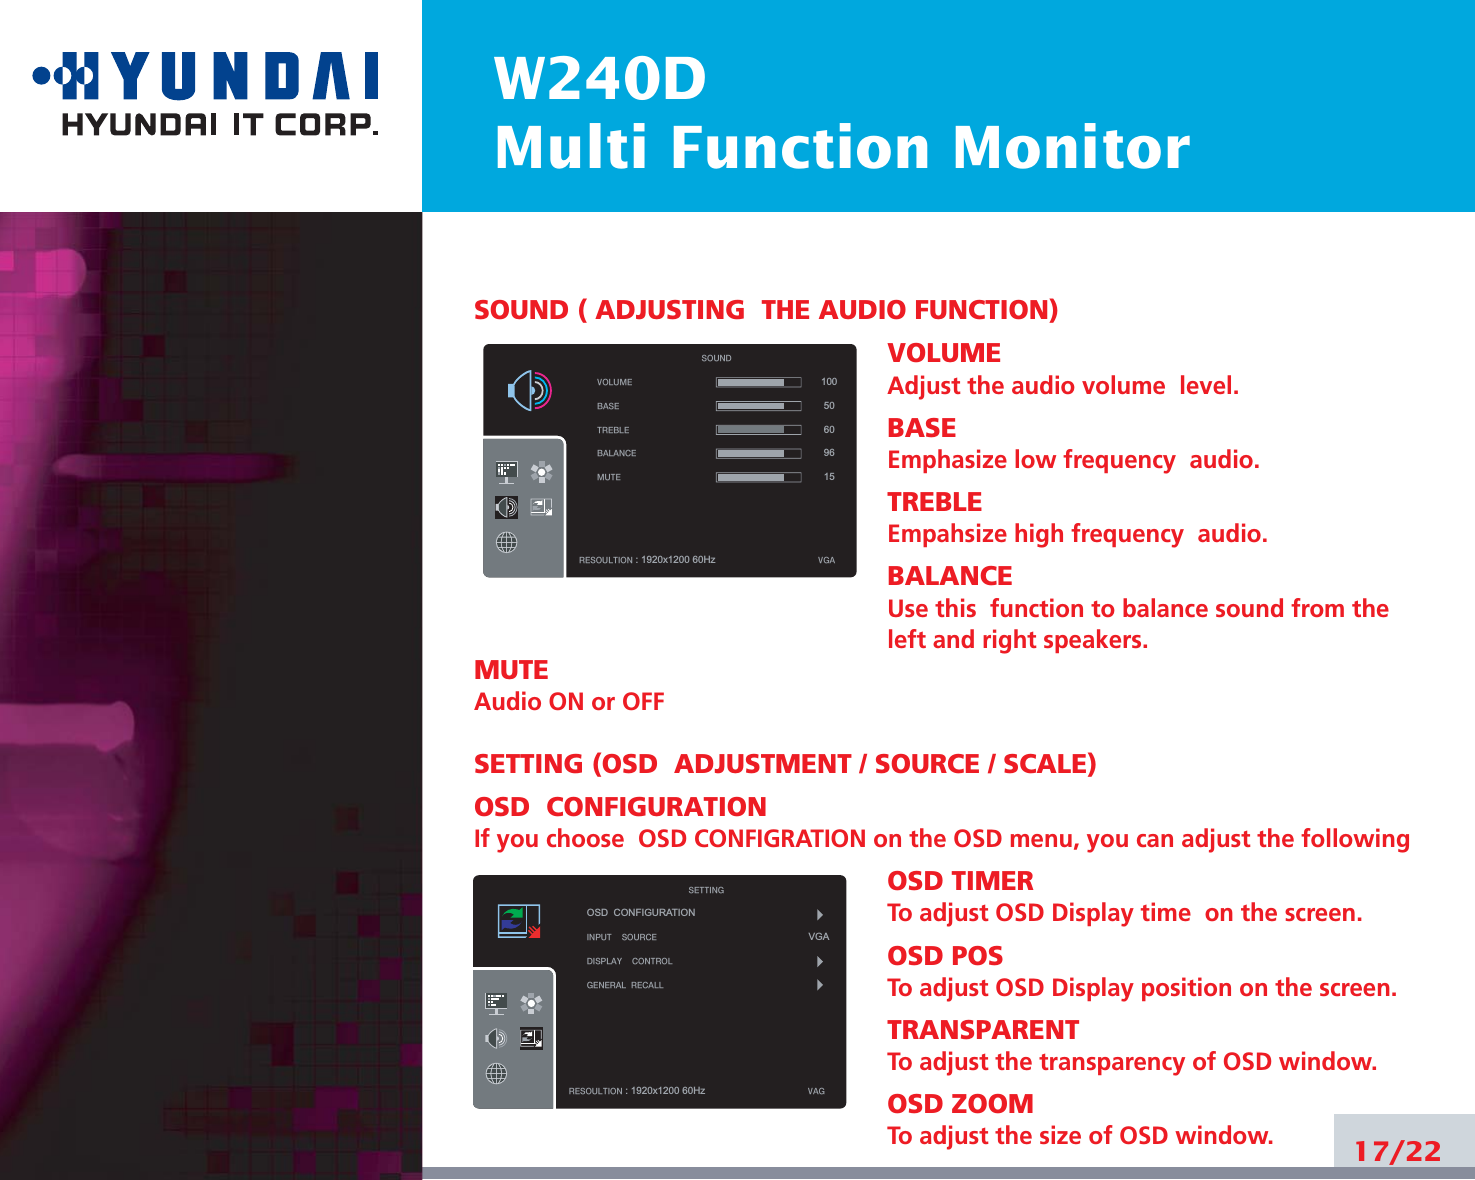 W240DMulti Function Monitor17/22SOUND ( ADJUSTING  THE AUDIO FUNCTION)VOLUMEAdjust the audio volume  level.BASEEmphasize low frequency  audio.TREBLEEmpahsize high frequency  audio.BALANCEUse this  function to balance sound from theleft and right speakers.MUTEAudio ON or OFFSETTING (OSD  ADJUSTMENT / SOURCE / SCALE)OSD  CONFIGURATIONIf you choose  OSD CONFIGRATION on the OSD menu, you can adjust the followingOSD TIMERTo adjust OSD Display time  on the screen.OSD POSTo adjust OSD Display position on the screen.TRANSPARENTTo adjust the transparency of OSD window.OSD ZOOMTo adjust the size of OSD window.VOLUMEBASETREBLEBALANCEMUTERESOULTION : 1920x1200 60Hz VGASOUND10050609615OSD  CONFIGURATIONINPUTSOURCEDISPLAYCONTROLGENERALRECALLRESOULTION : 1920x1200 60Hz VAGSETTINGVGA